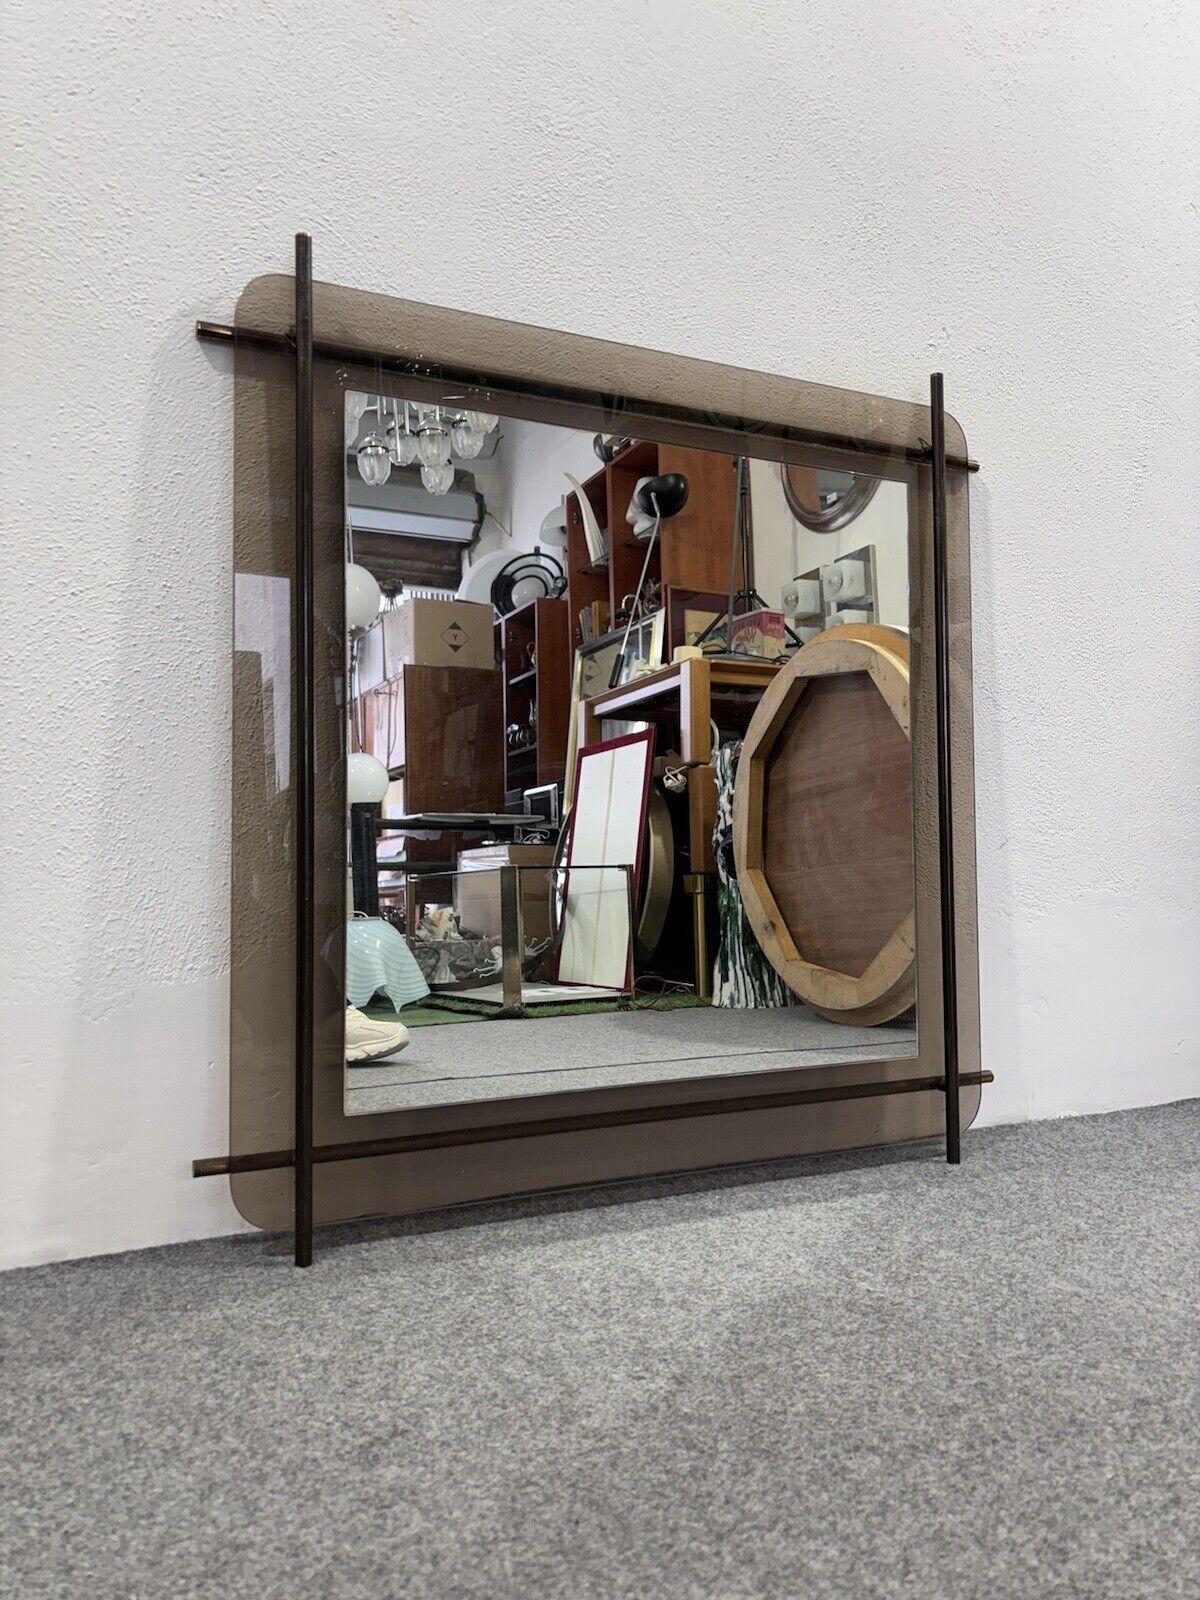 Renato Zevi Brass Mirror Design Modernism.

The item is in excellent conservative condition, there are no cosmetic or structural defects to report. Only slight and obvious signs of time . (Please see photos)

Height 85 cm

Width 85 cms